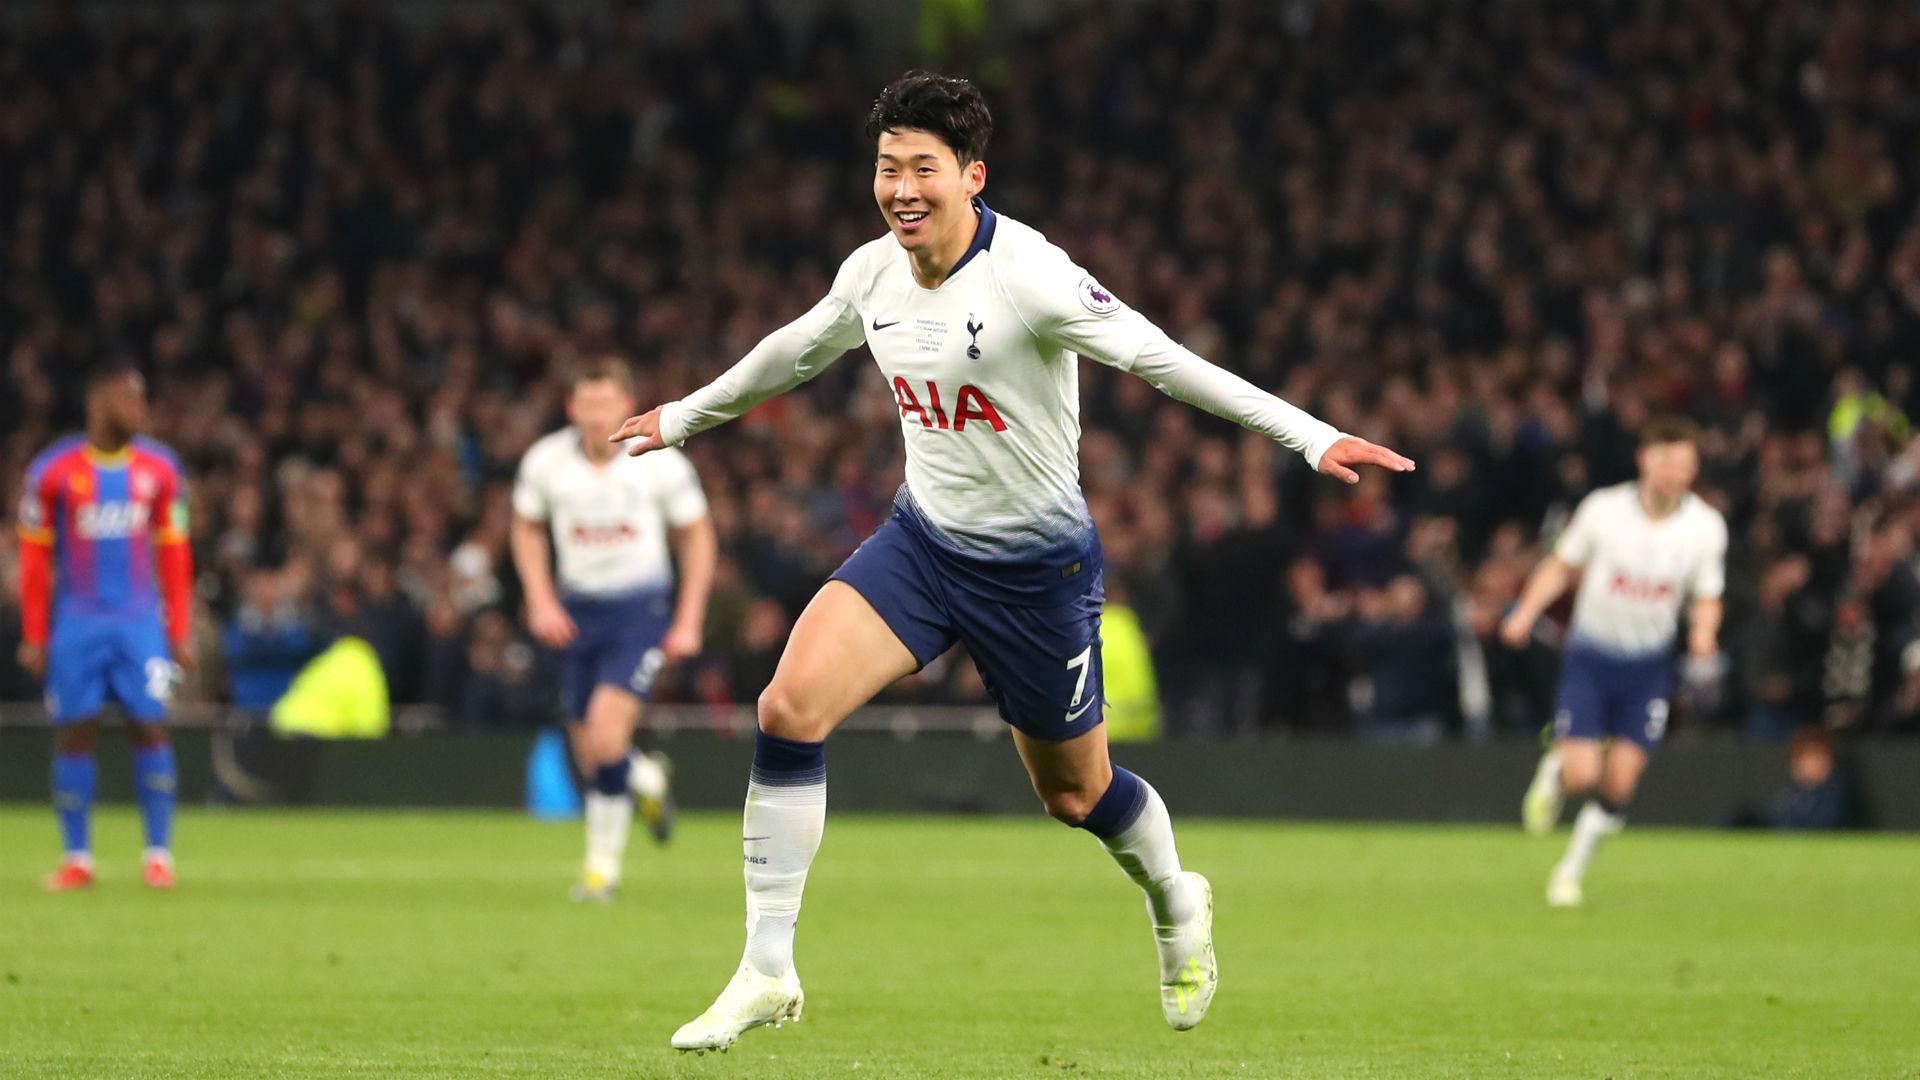 Tottenham 2 Crystal Palace 0: Spurs open new stadium with routine